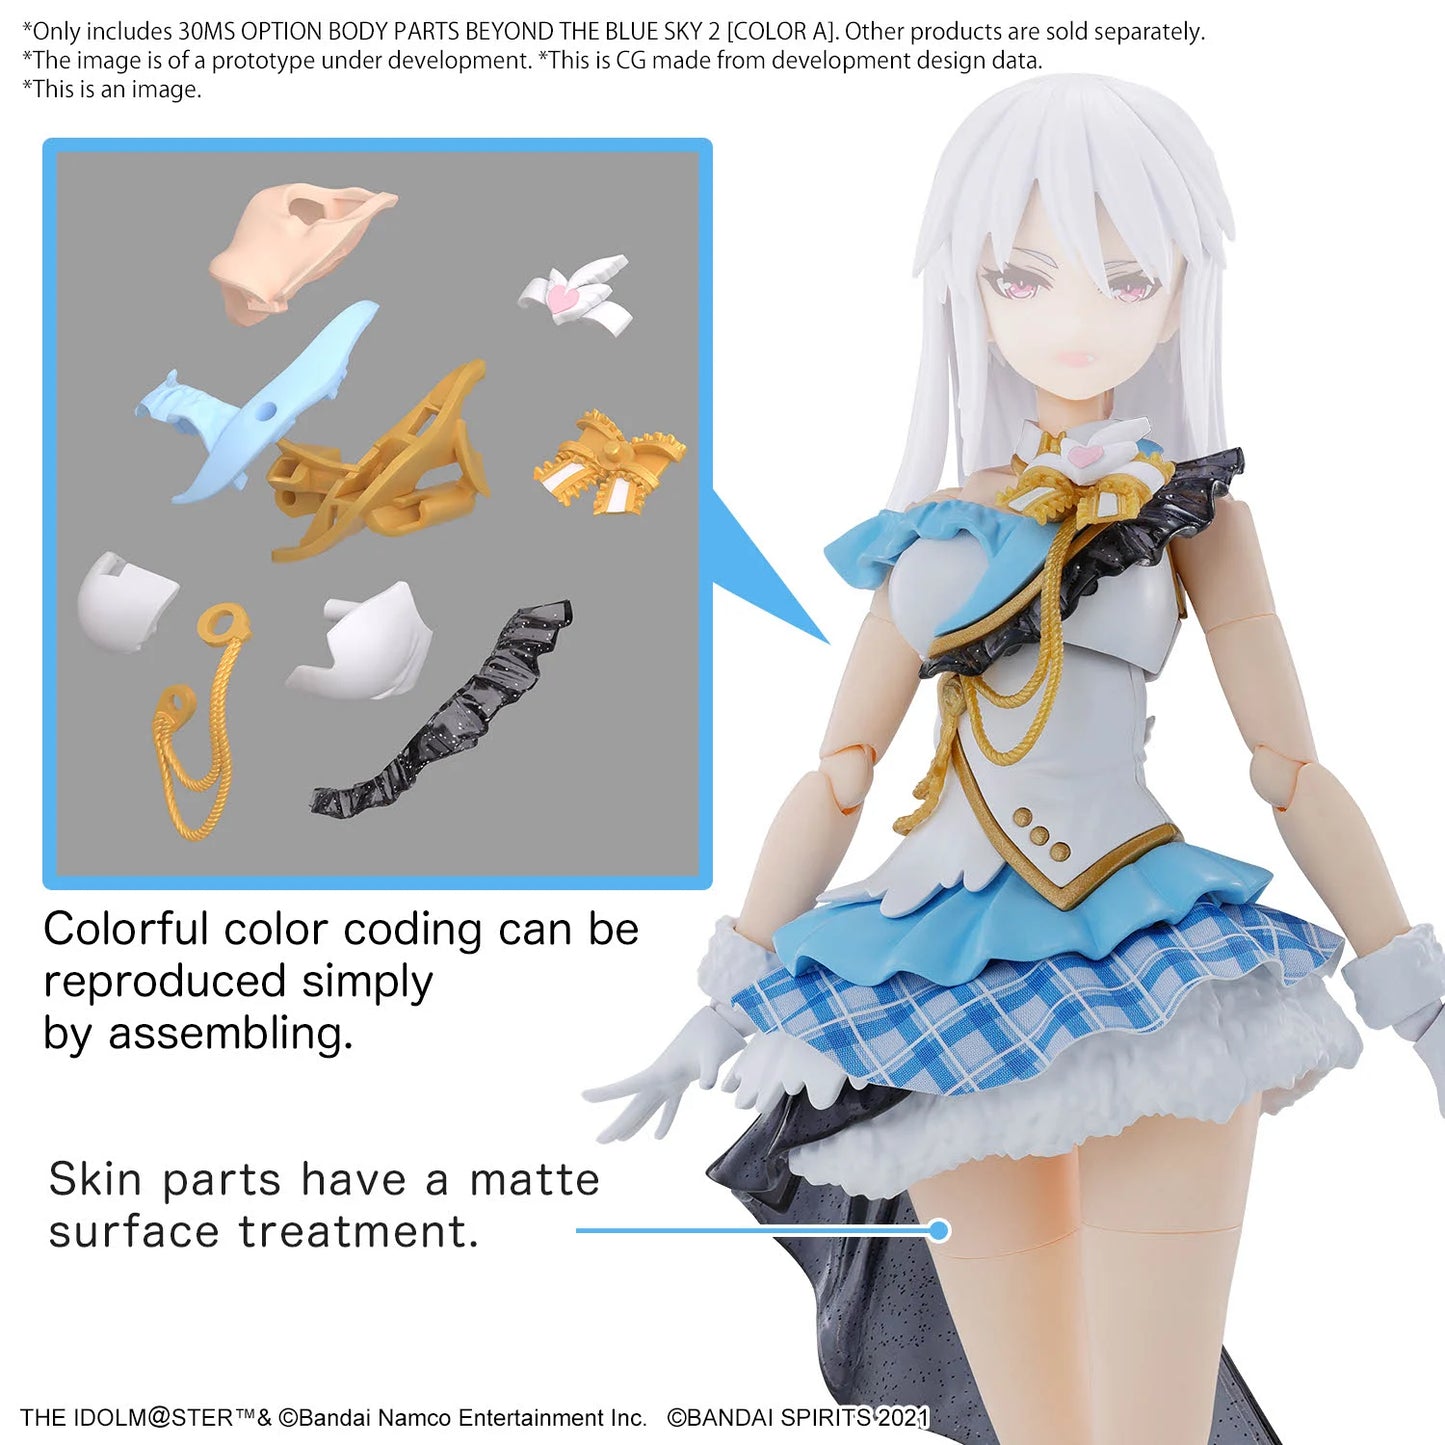 30MS - The Idolmaster Option Body Parts Beyond The Blue Sky 2 Color A - Model Kit